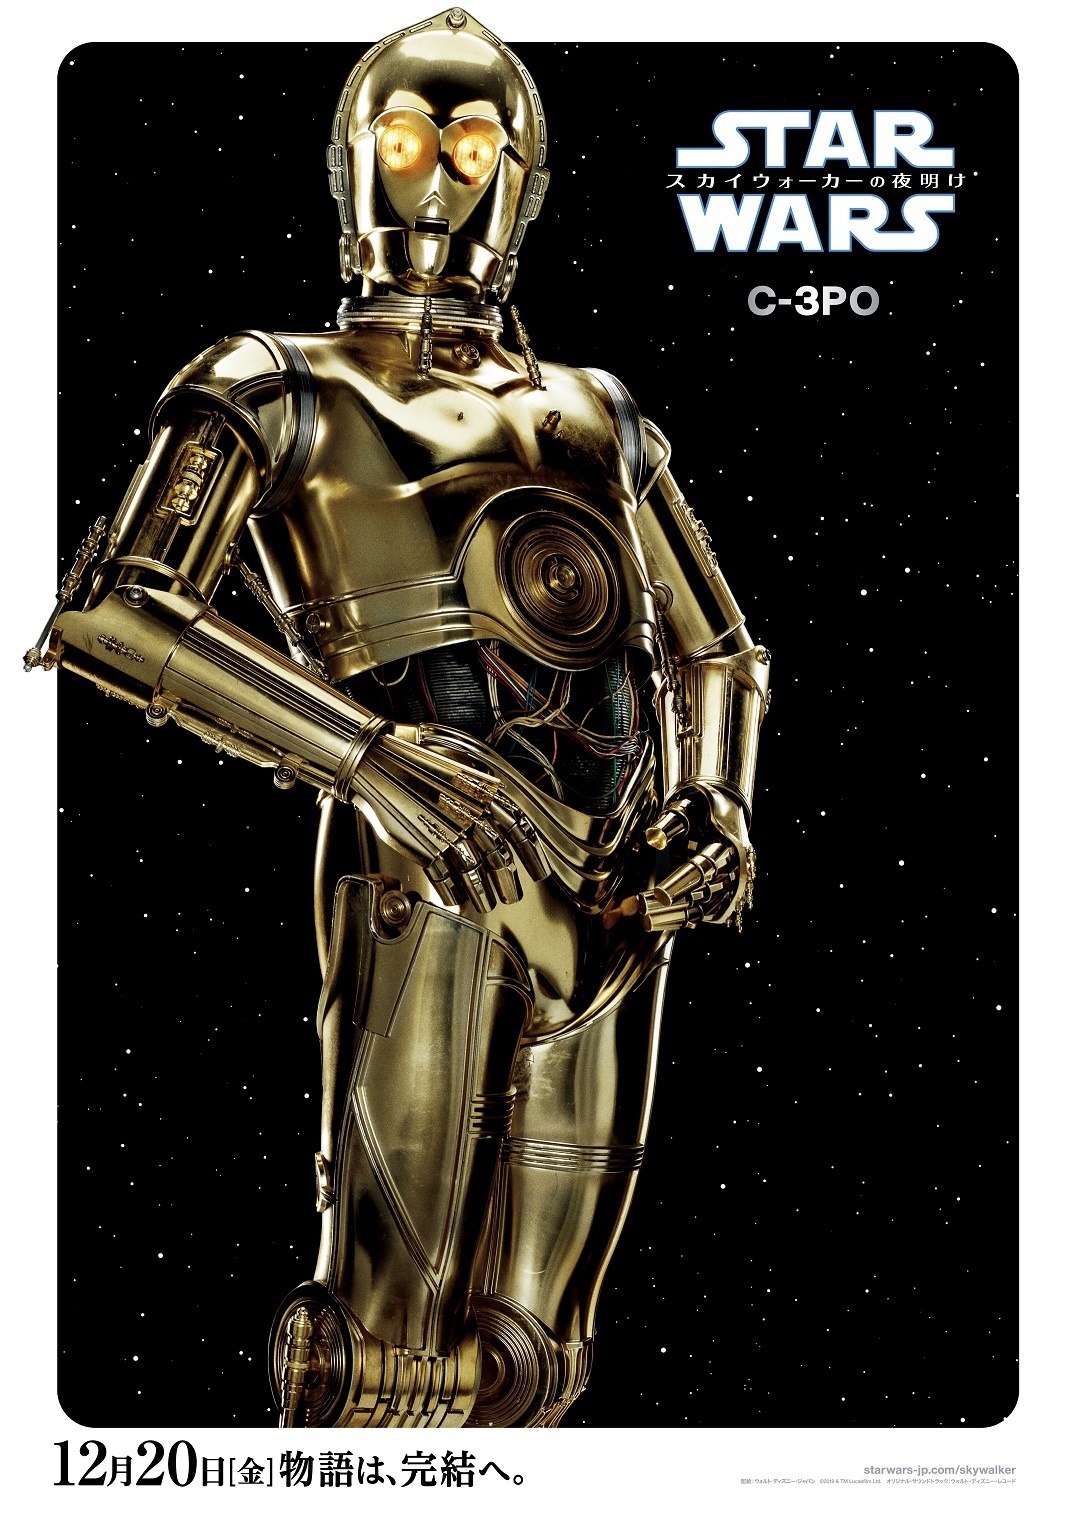 C-3PO （C）2019 Lucasfilm Ltd. All Rights Reserved.